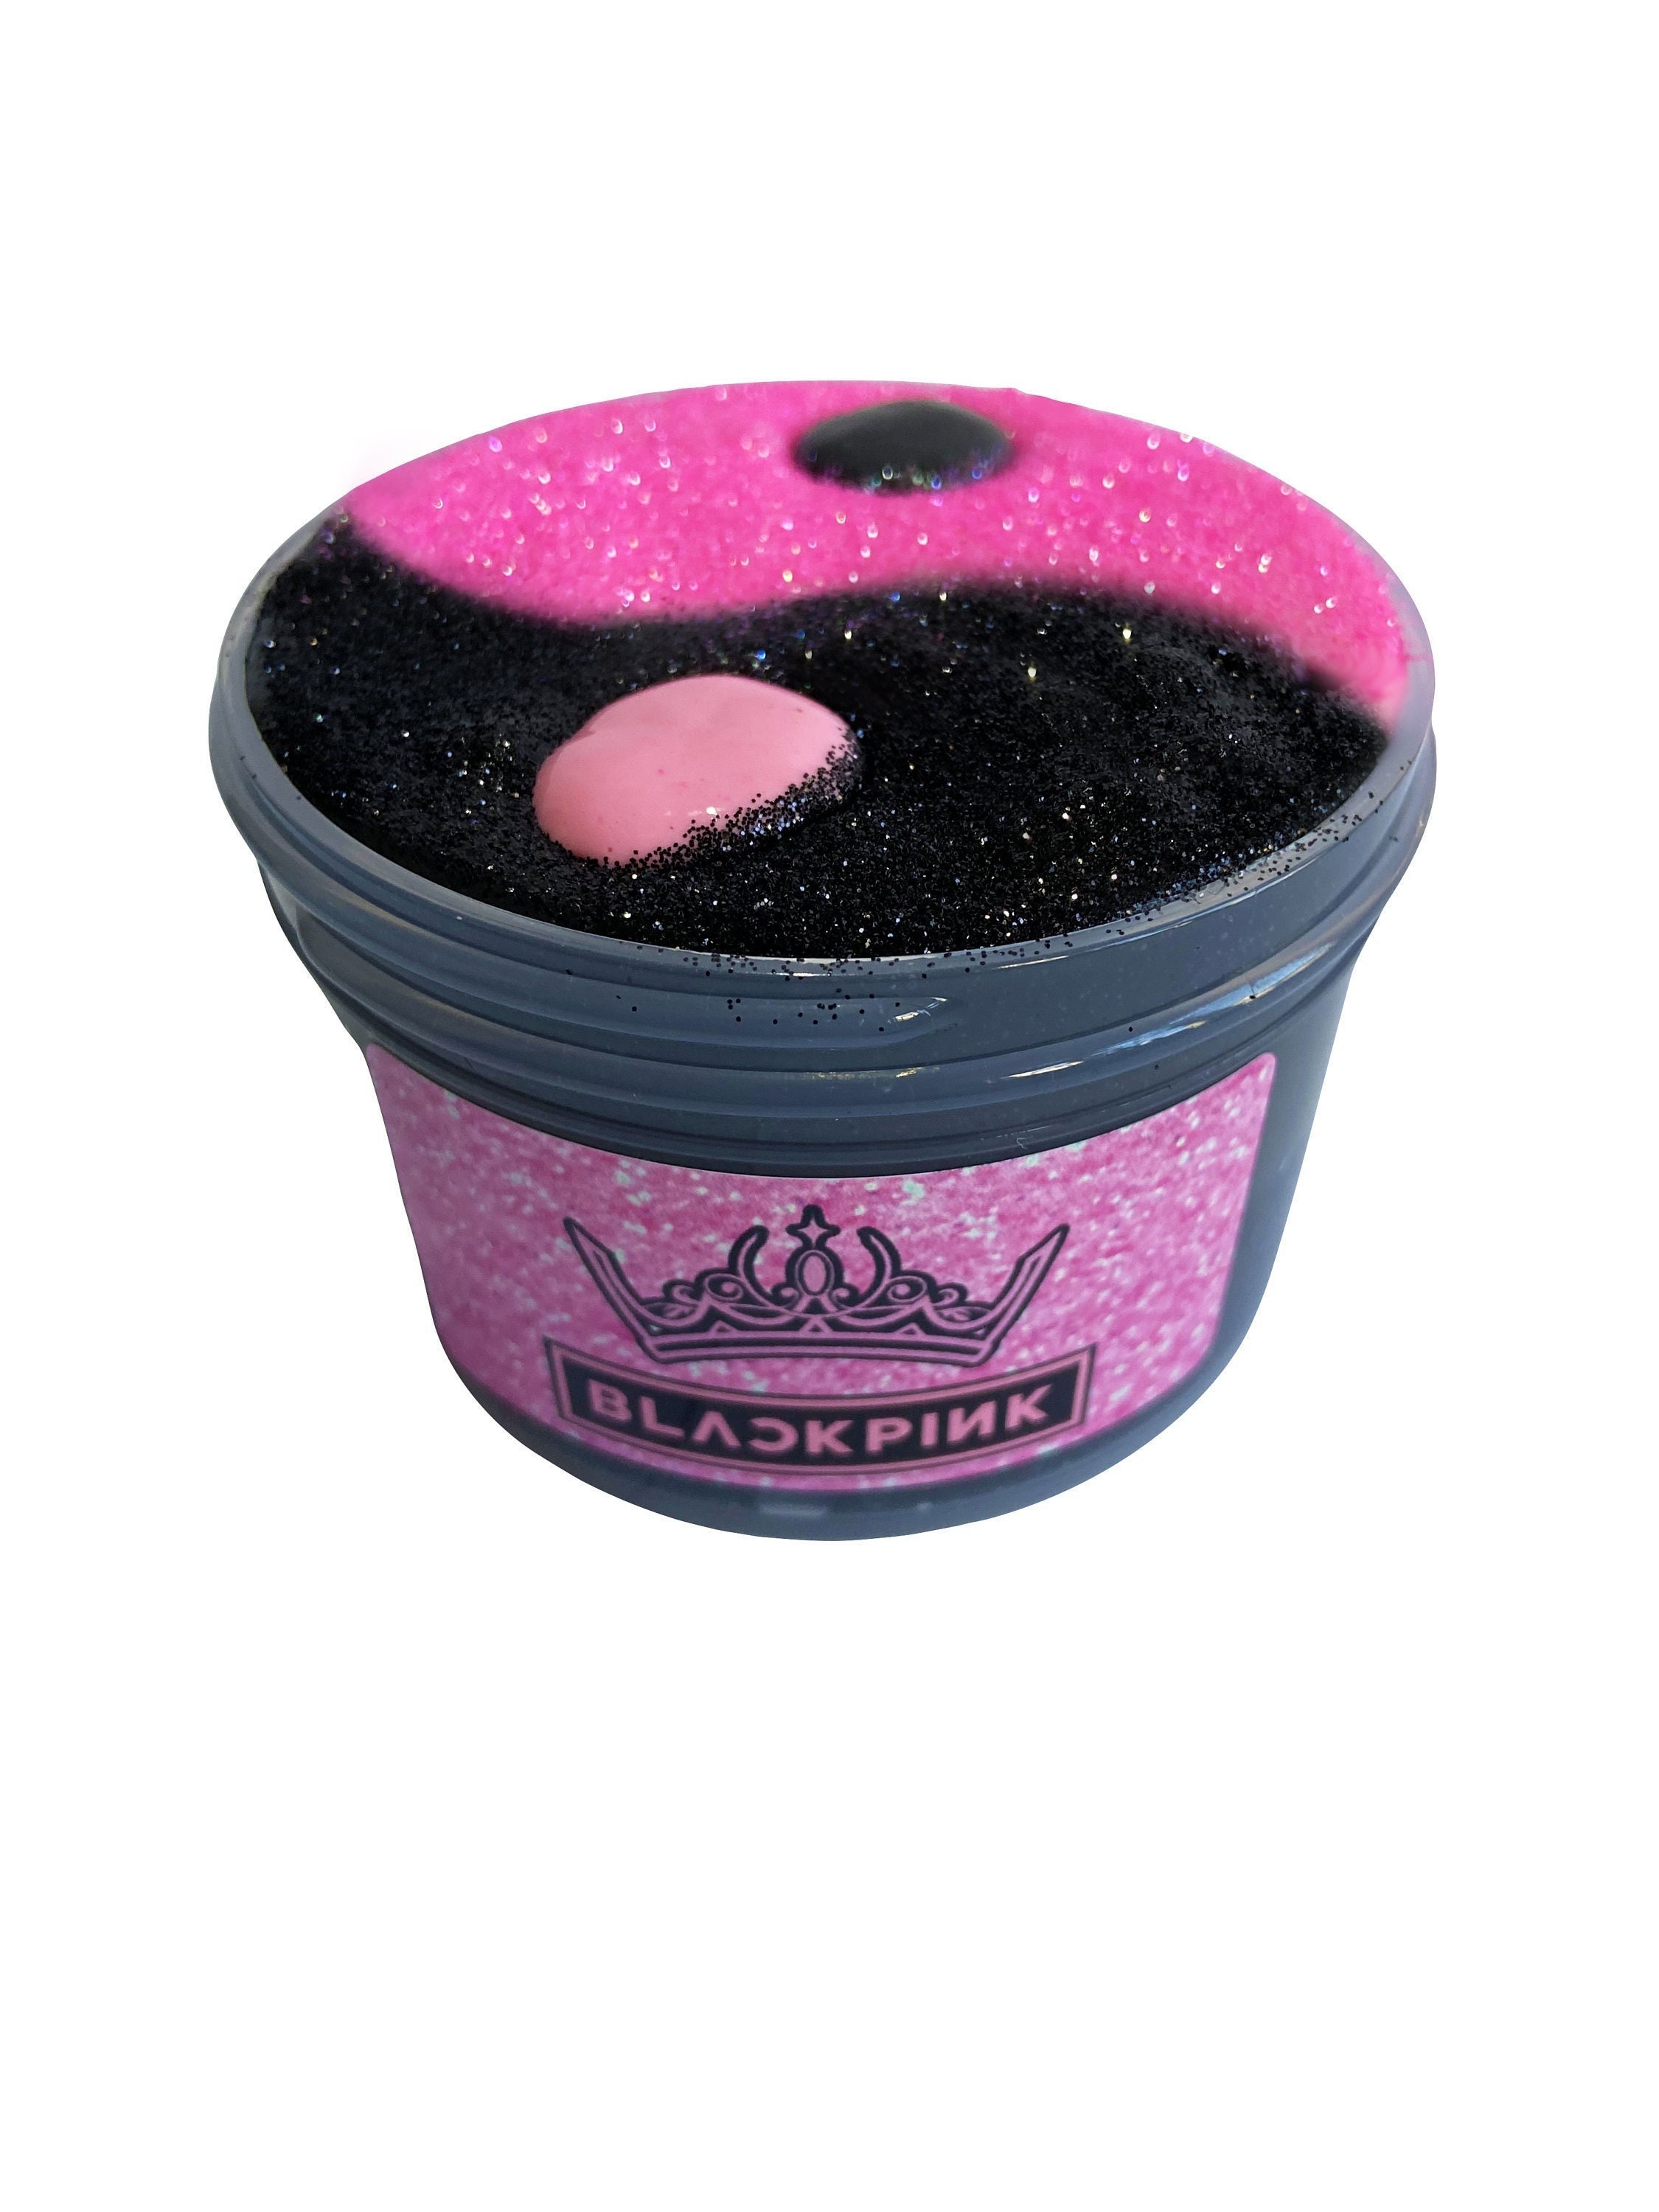 8 Oz.pinkity Drinkity Slime Kit Avalanche Thick Icee Glossy Slime